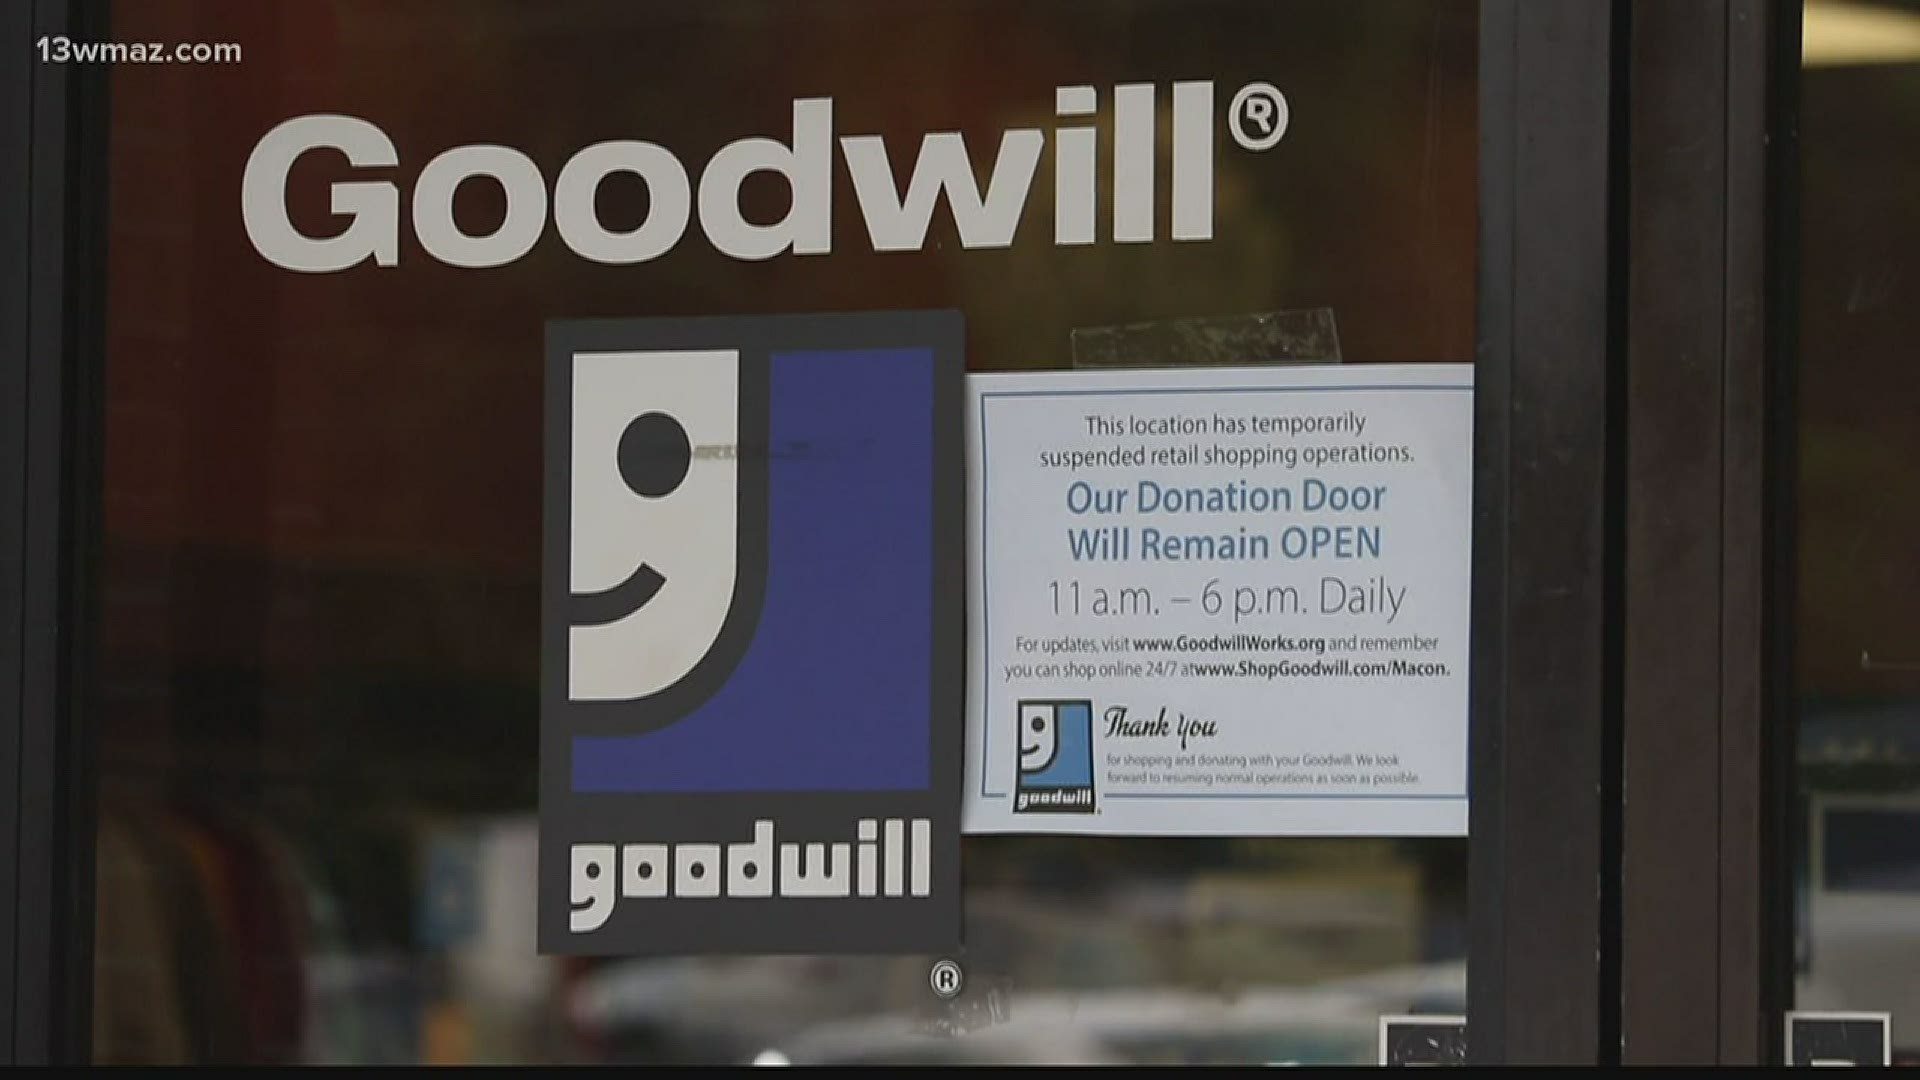 did you know goodwill has an online store now? Its called